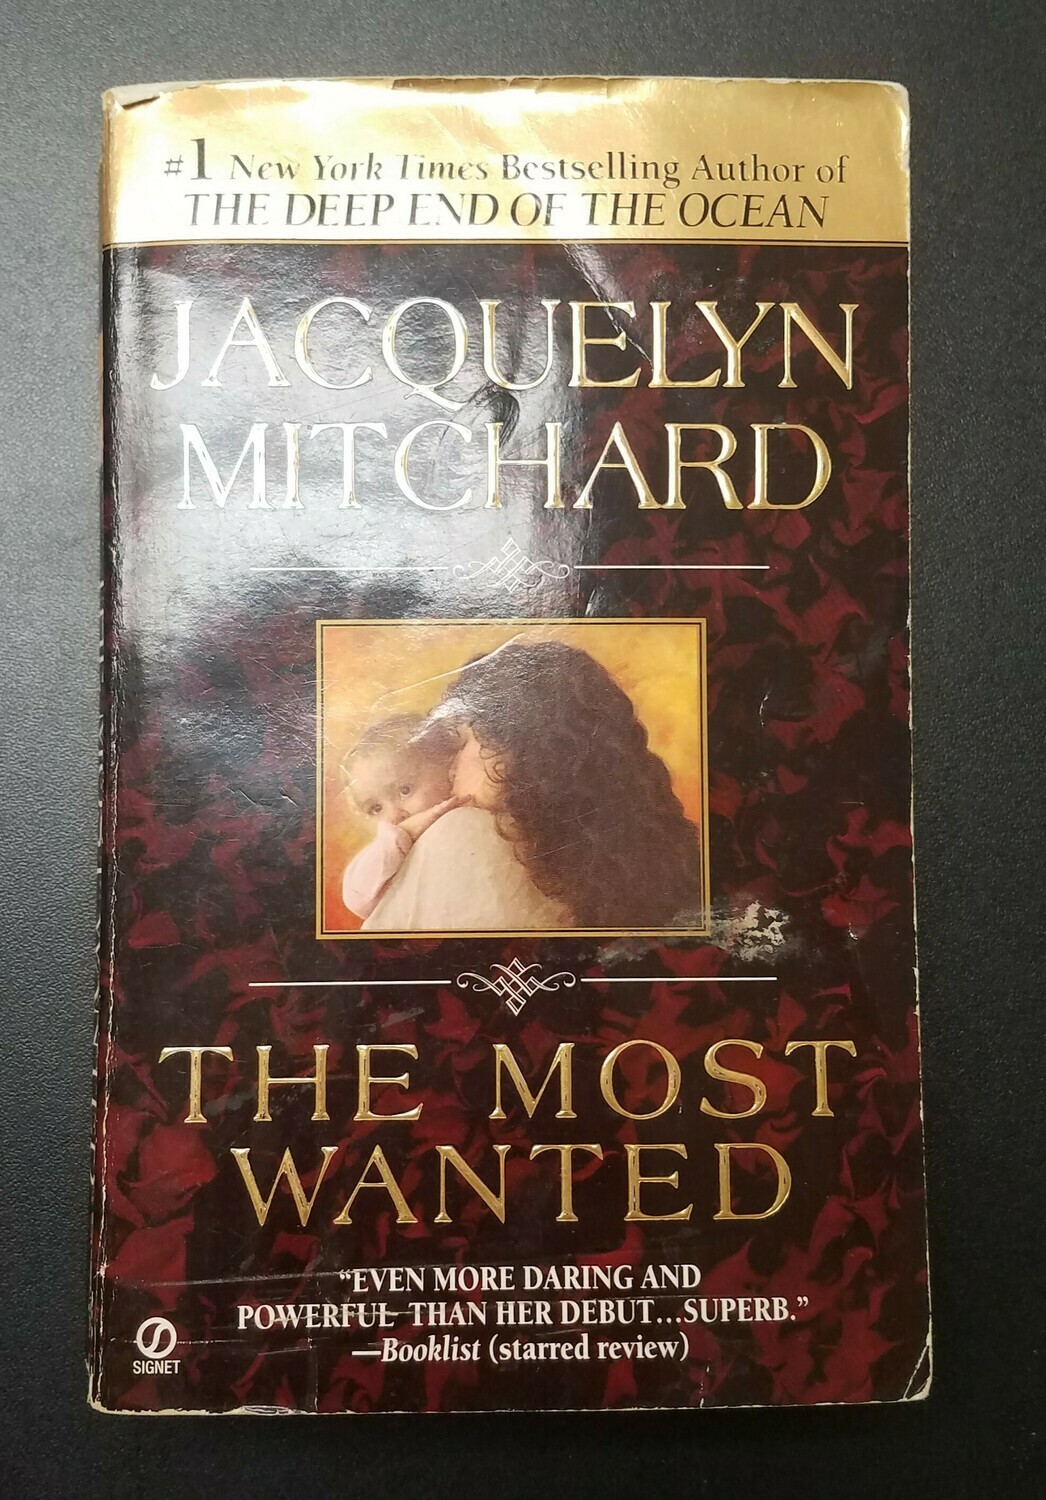 The Most Wanted by Jacquelyn Mitchard